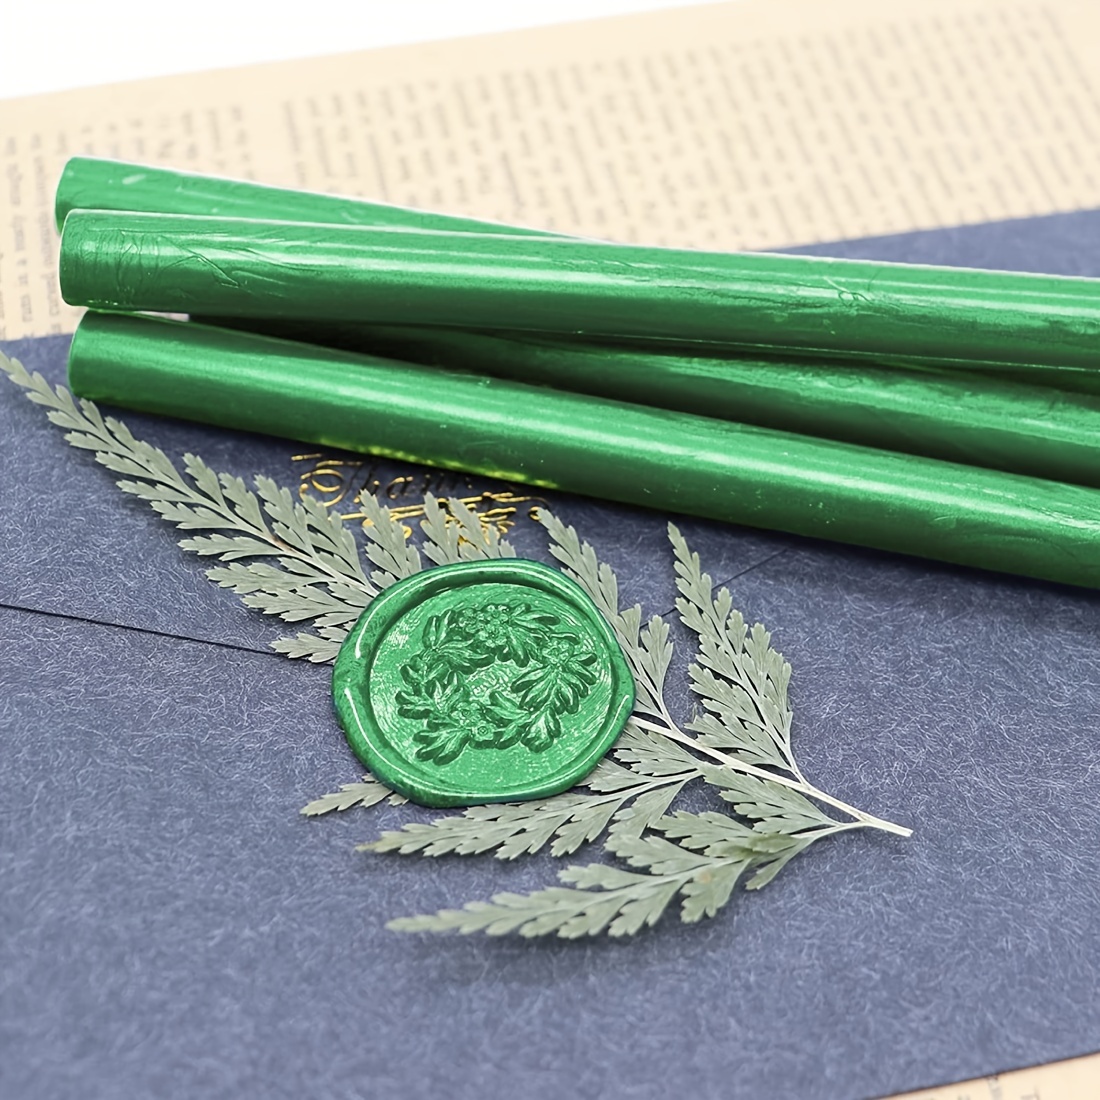 10pcs Sealing Wax Sticks Multicolor Small Round Stamp Tools For Diy  Invitations Cards Envelopespine Green